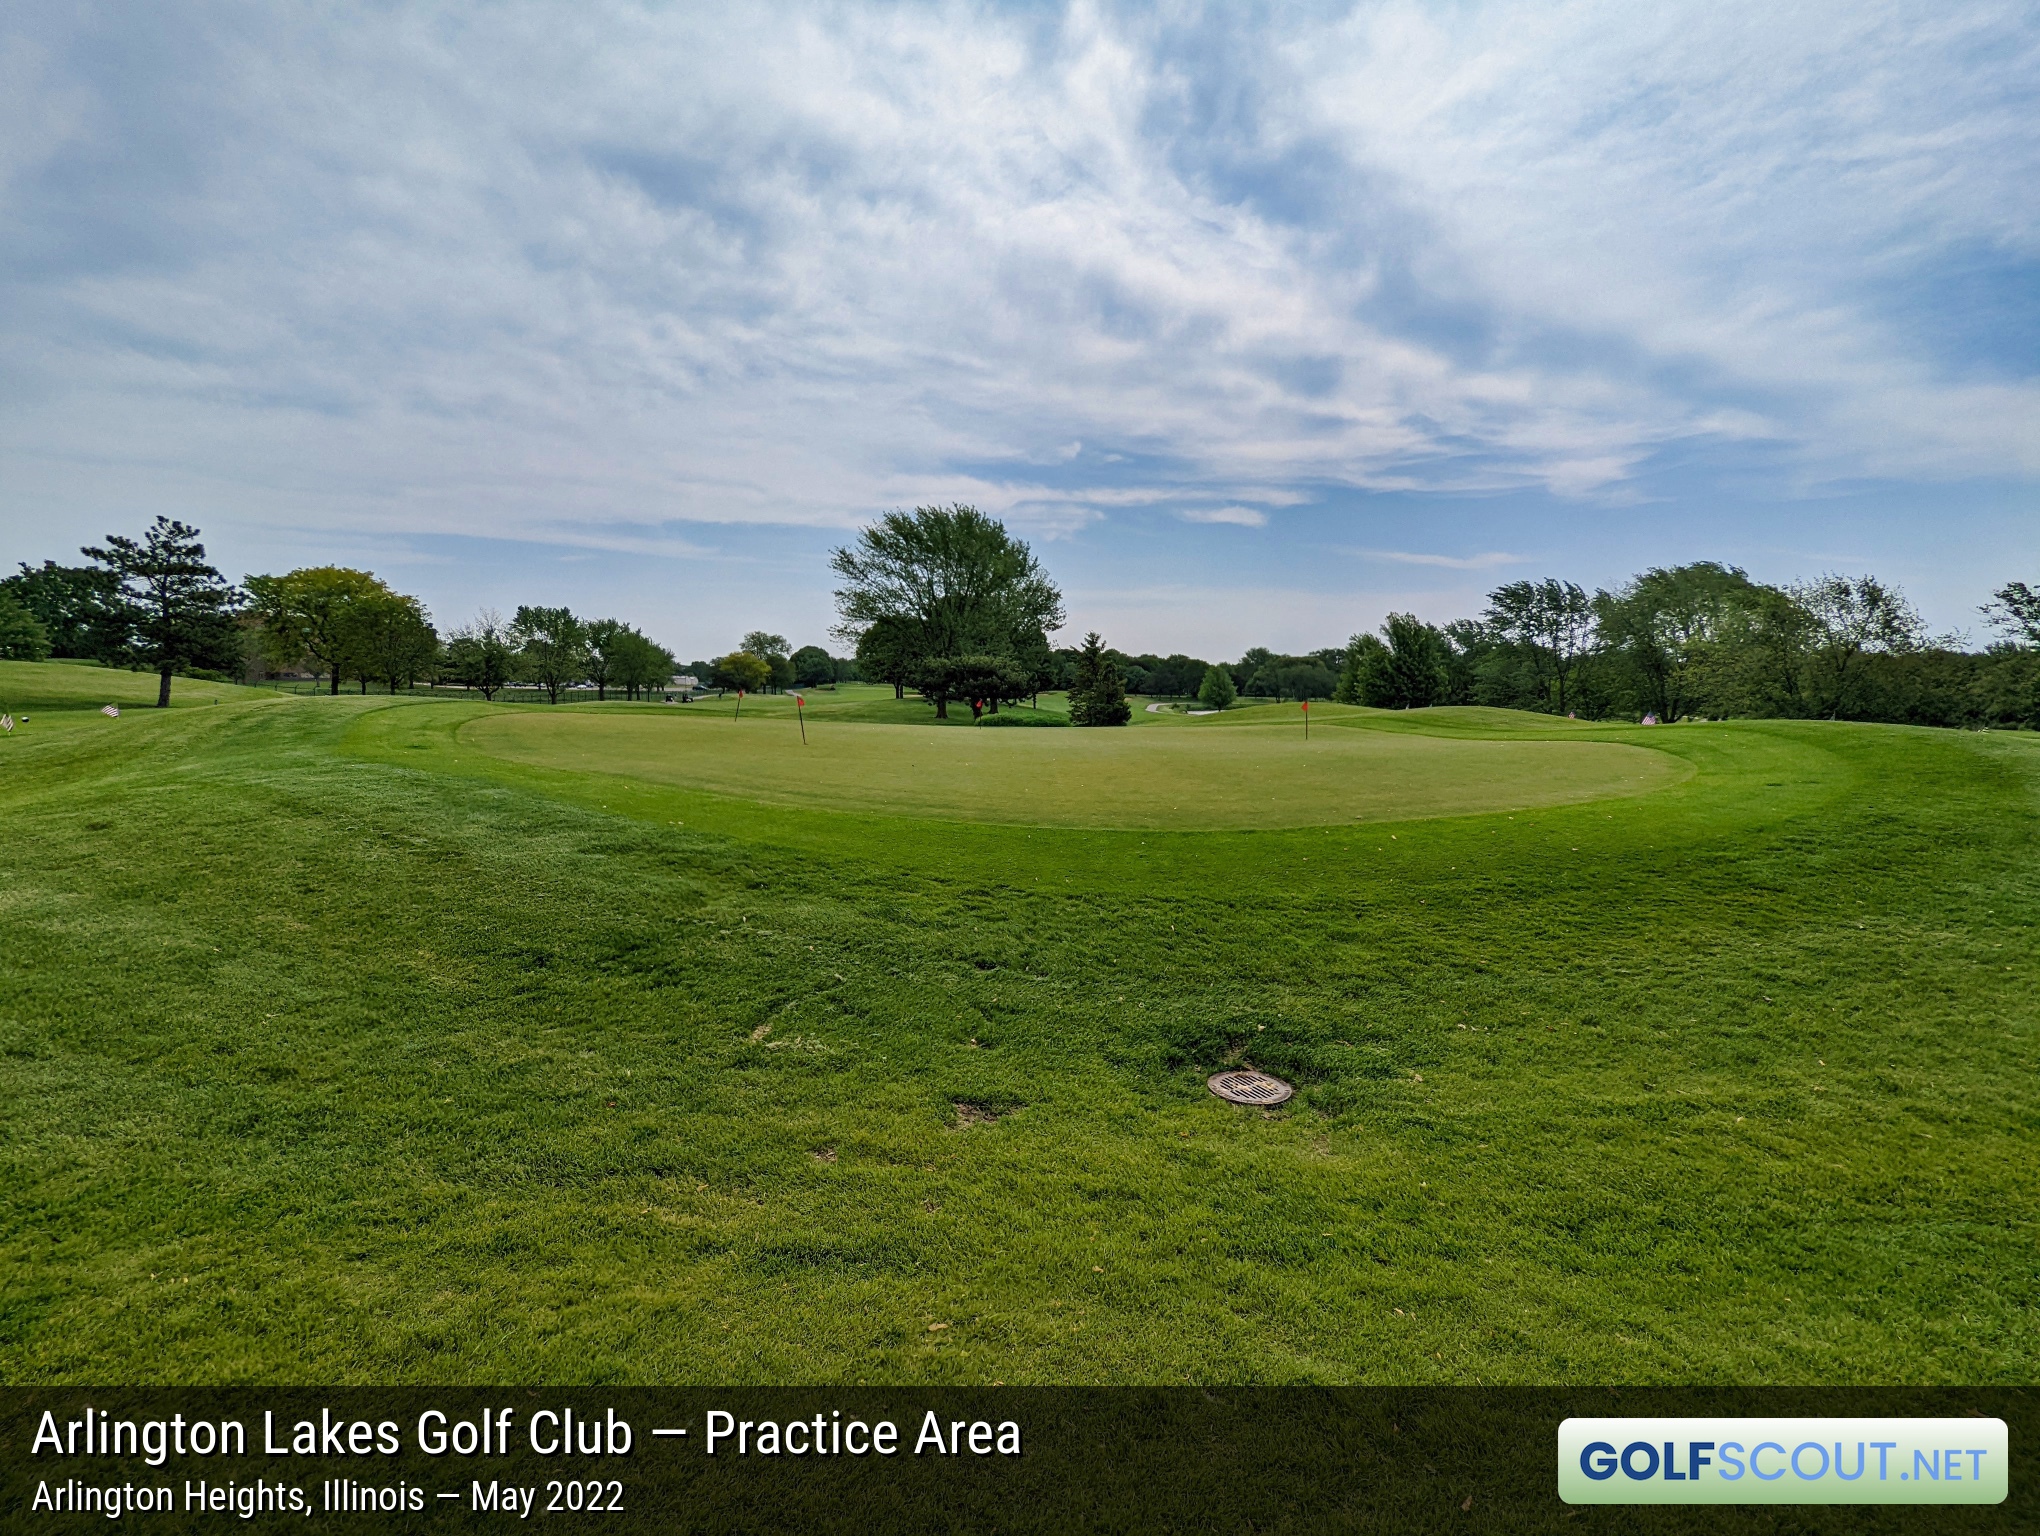 Photo of the practice area at Arlington Lakes Golf Club in Arlington Heights, Illinois. There's one practice green at Arlington Lakes, where you can both chip and putt.